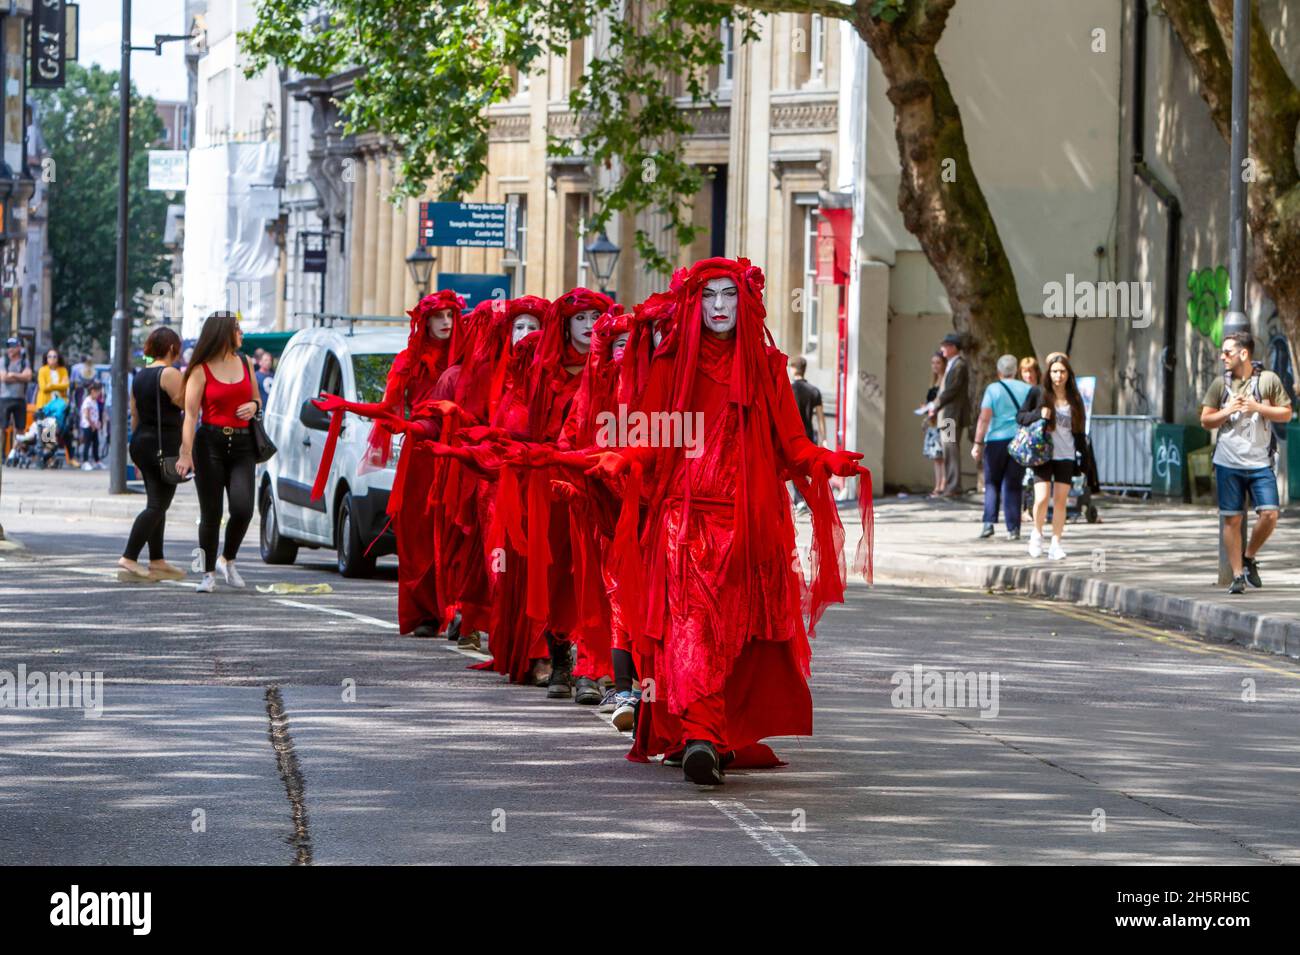 Street photograph of a group of Red Brigade Invisible Circus performers act a climate change demonstration walking through the streets of a city. Stock Photo